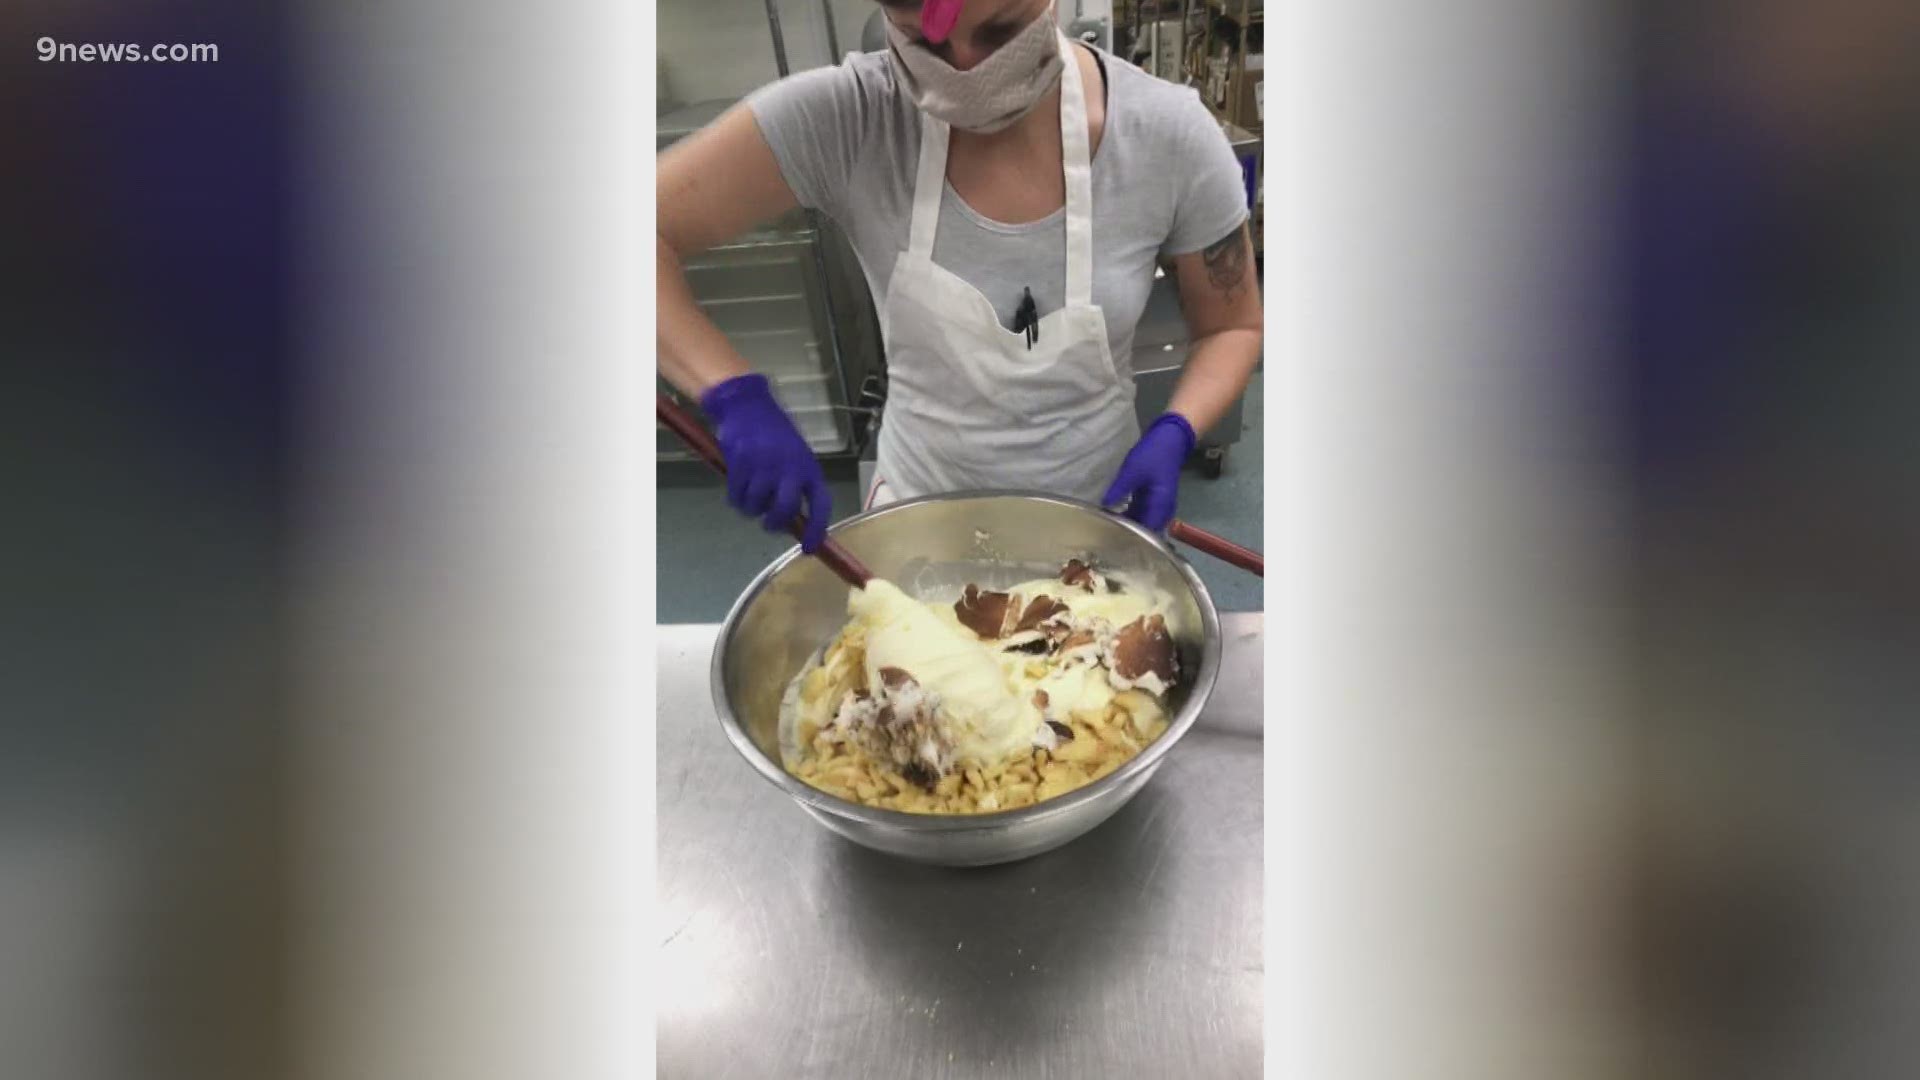 One woman took her unemployment as an opportunity to take a chance on a dream to open Pint's Peak Ice Cream in Denver.